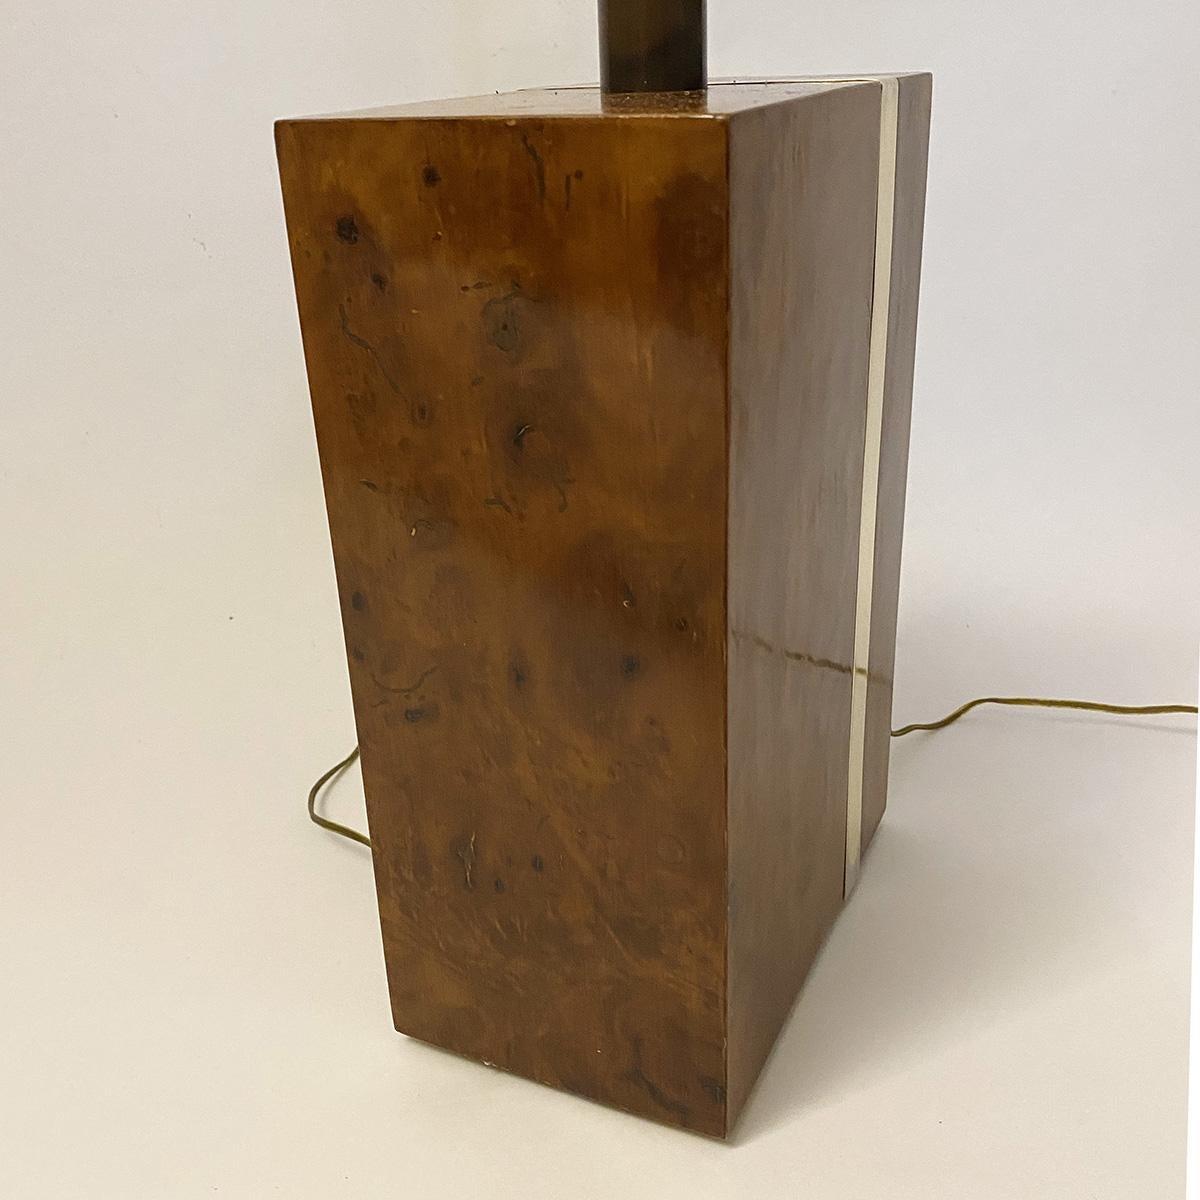 Modernist Lamp in Thuya Burl Wood and Brass, in the Style of Willy Rizzo, 1970s For Sale 3